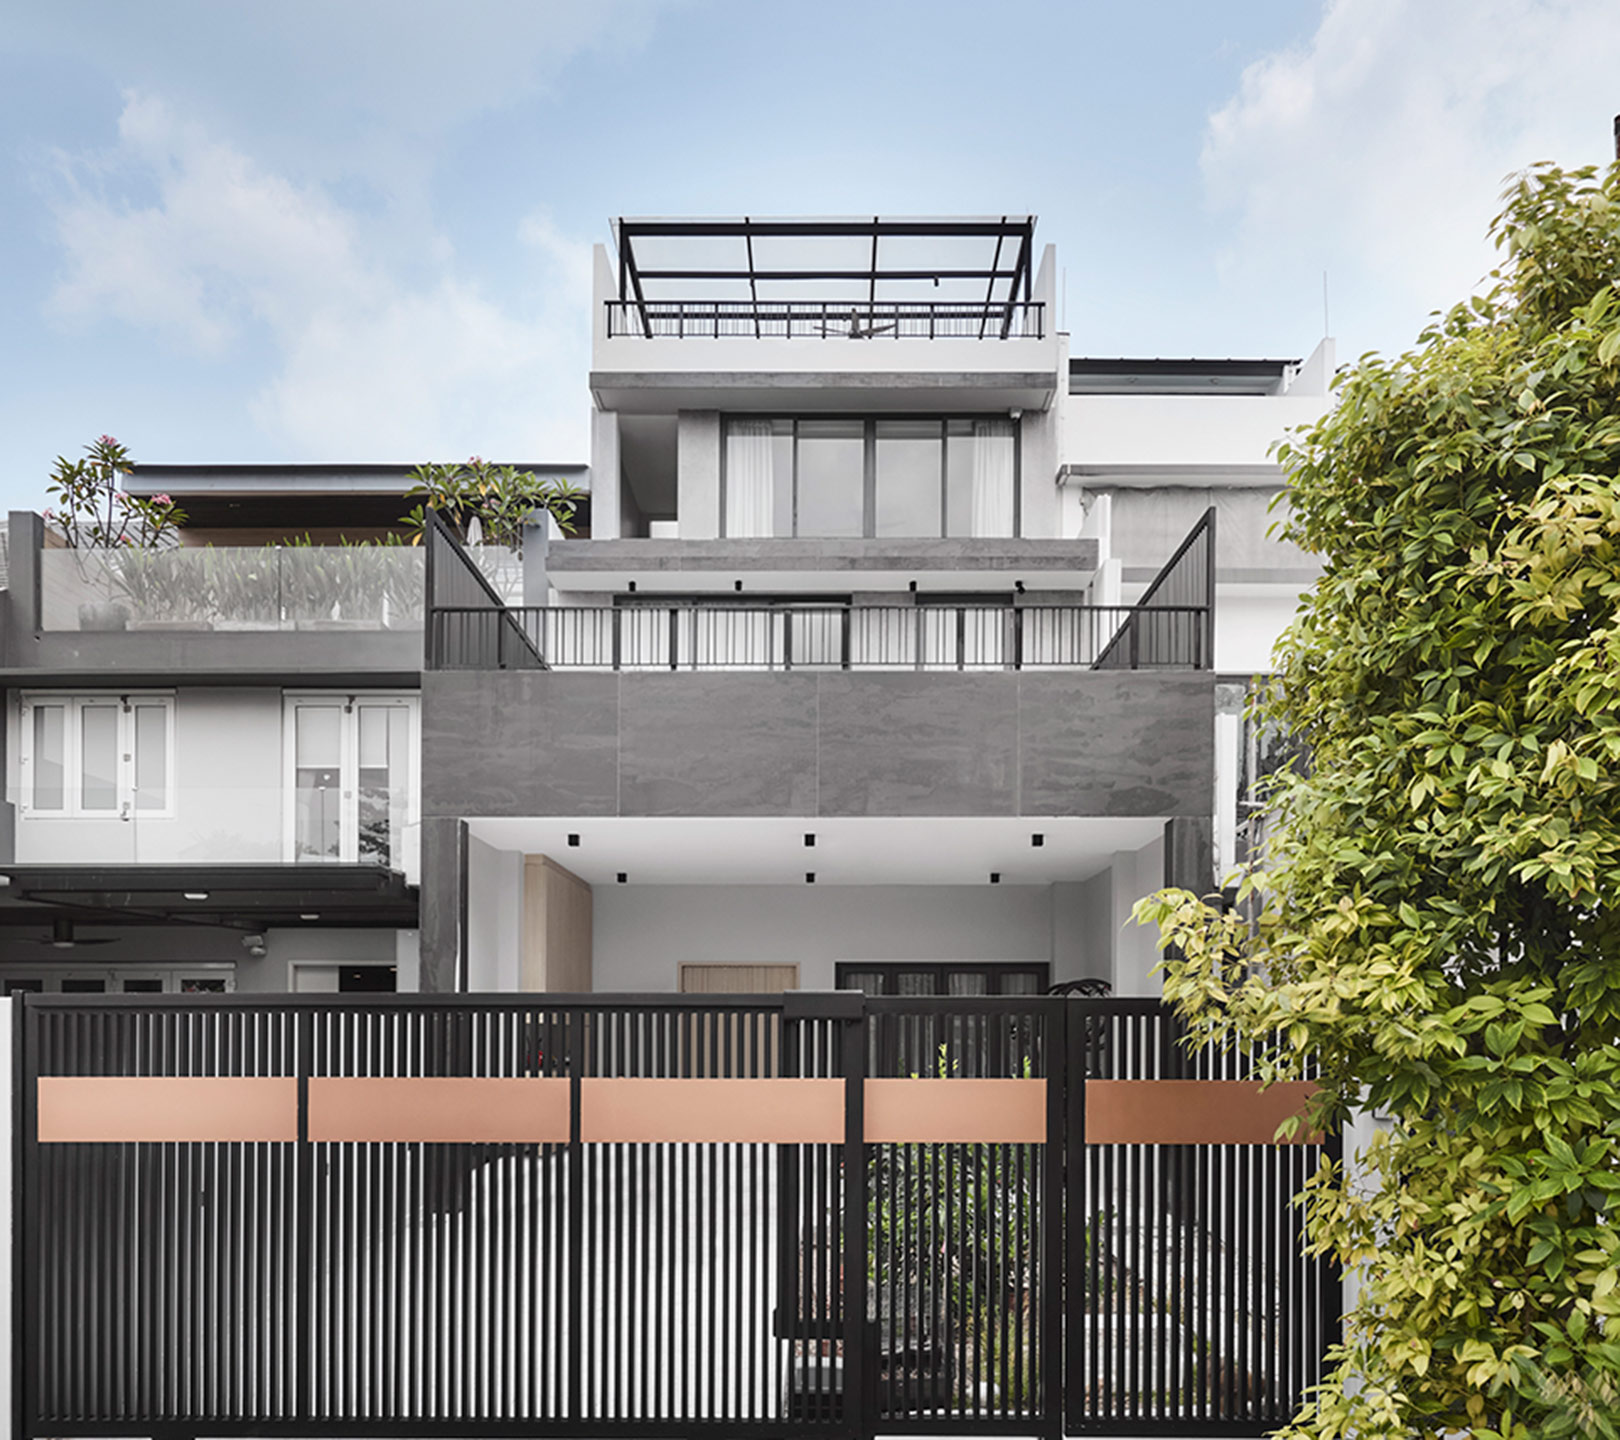 Image of Residential Home by Design Zage cover in Japandi style, Scandinavian architecture and Cosentino all come together in this Australian home - Cosentino